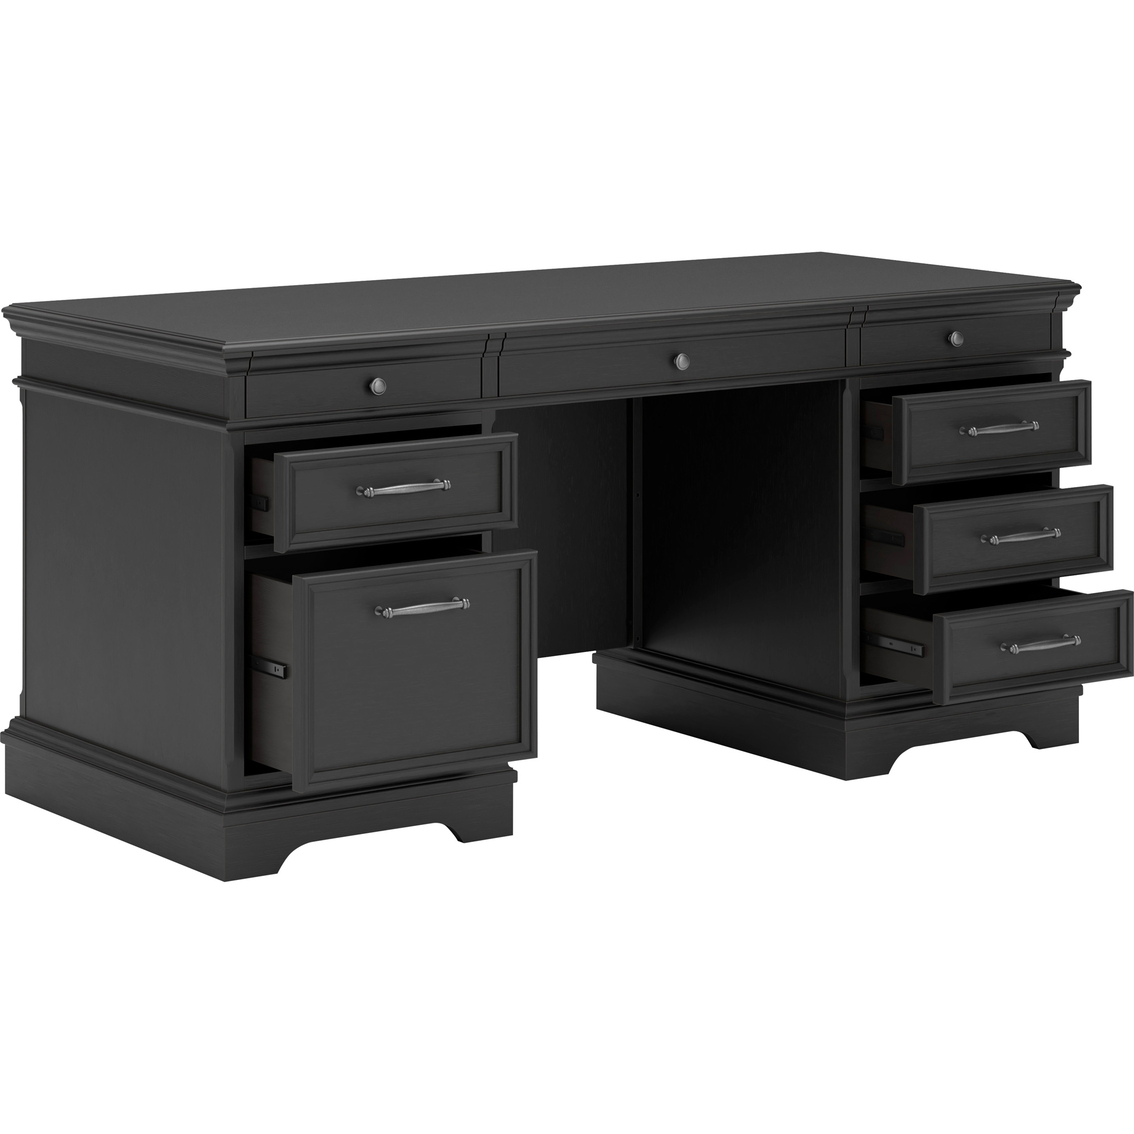 Signature Design by Ashley Beckincreek 66 in. Executive Office Desk - Image 4 of 7